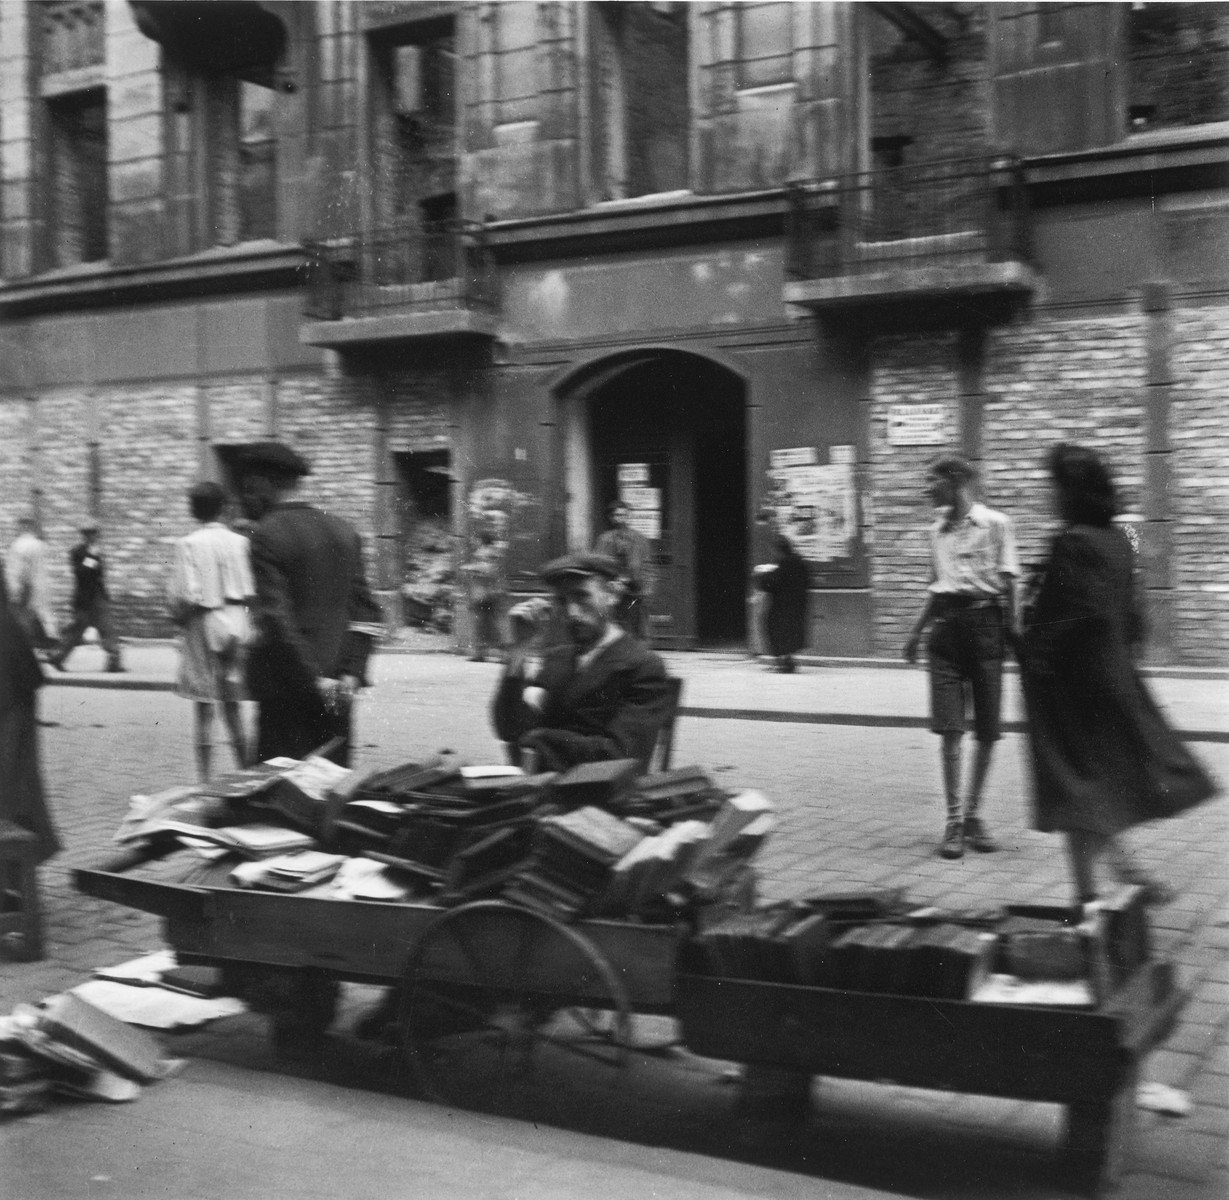 A vendor sells used books on a street in the Warsaw ghetto.

Joest's original caption reads: "I remember quite clearly that I asked myself how these people could buy books when they had nothing to eat.  I don't recall the location of this picture.  There were many such book carts."